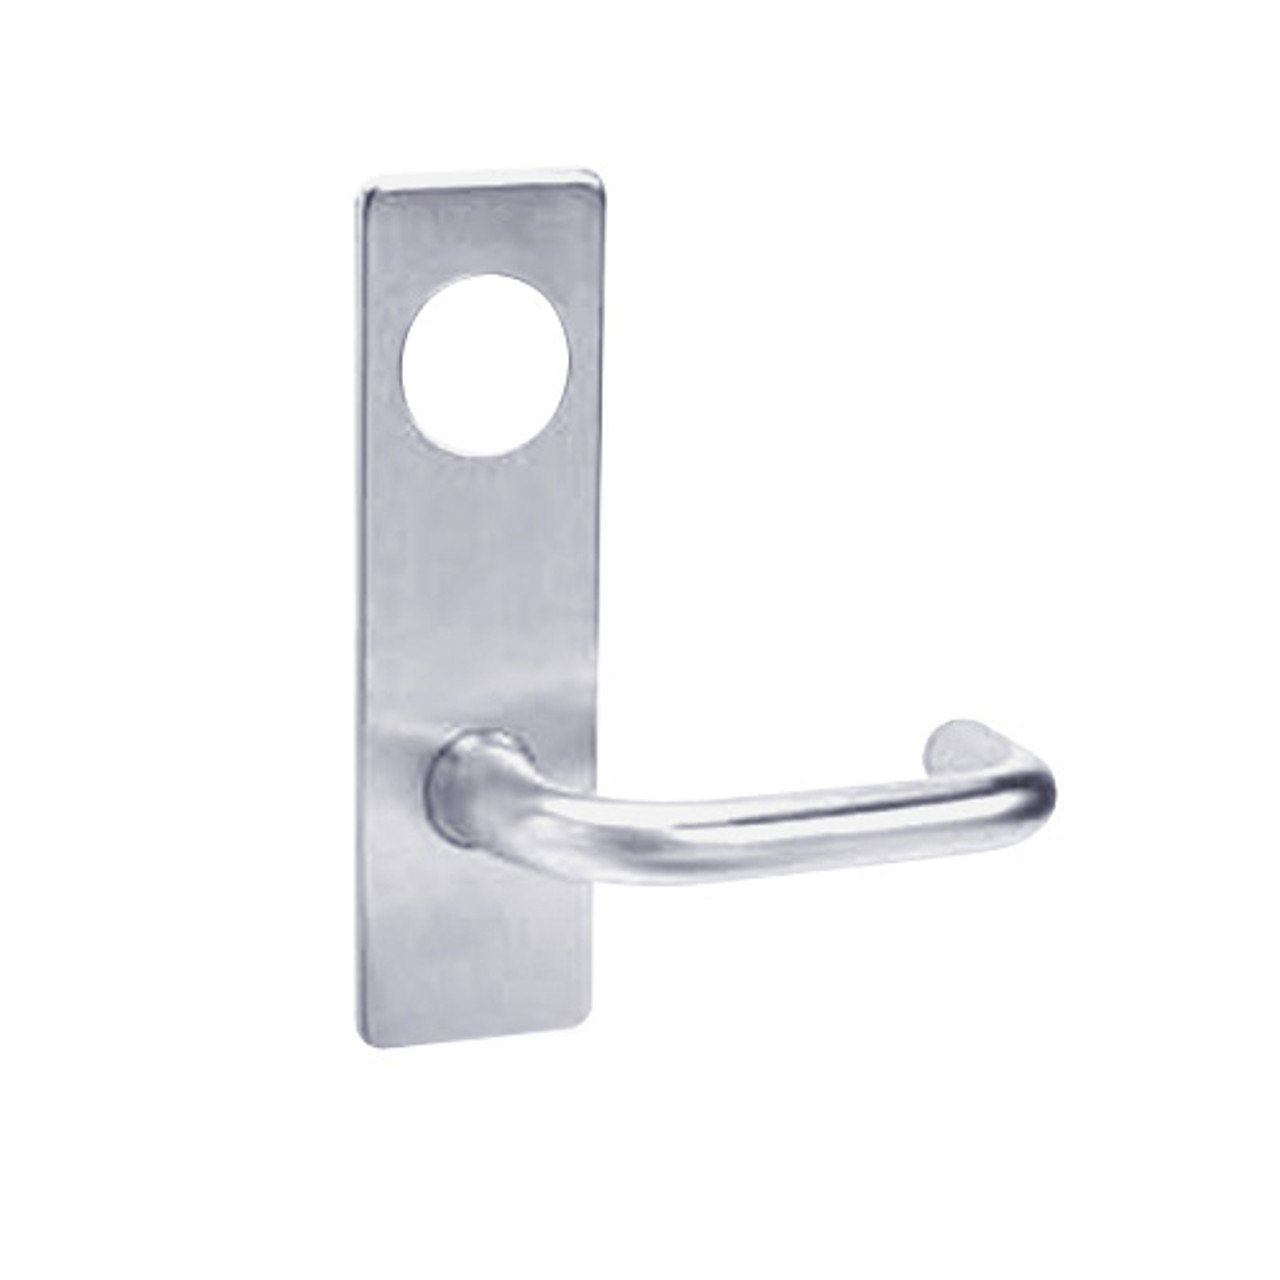 ML2024-LSR-626-LC Corbin Russwin ML2000 Series Mortise Entrance Locksets with Lustra Lever in Satin Chrome